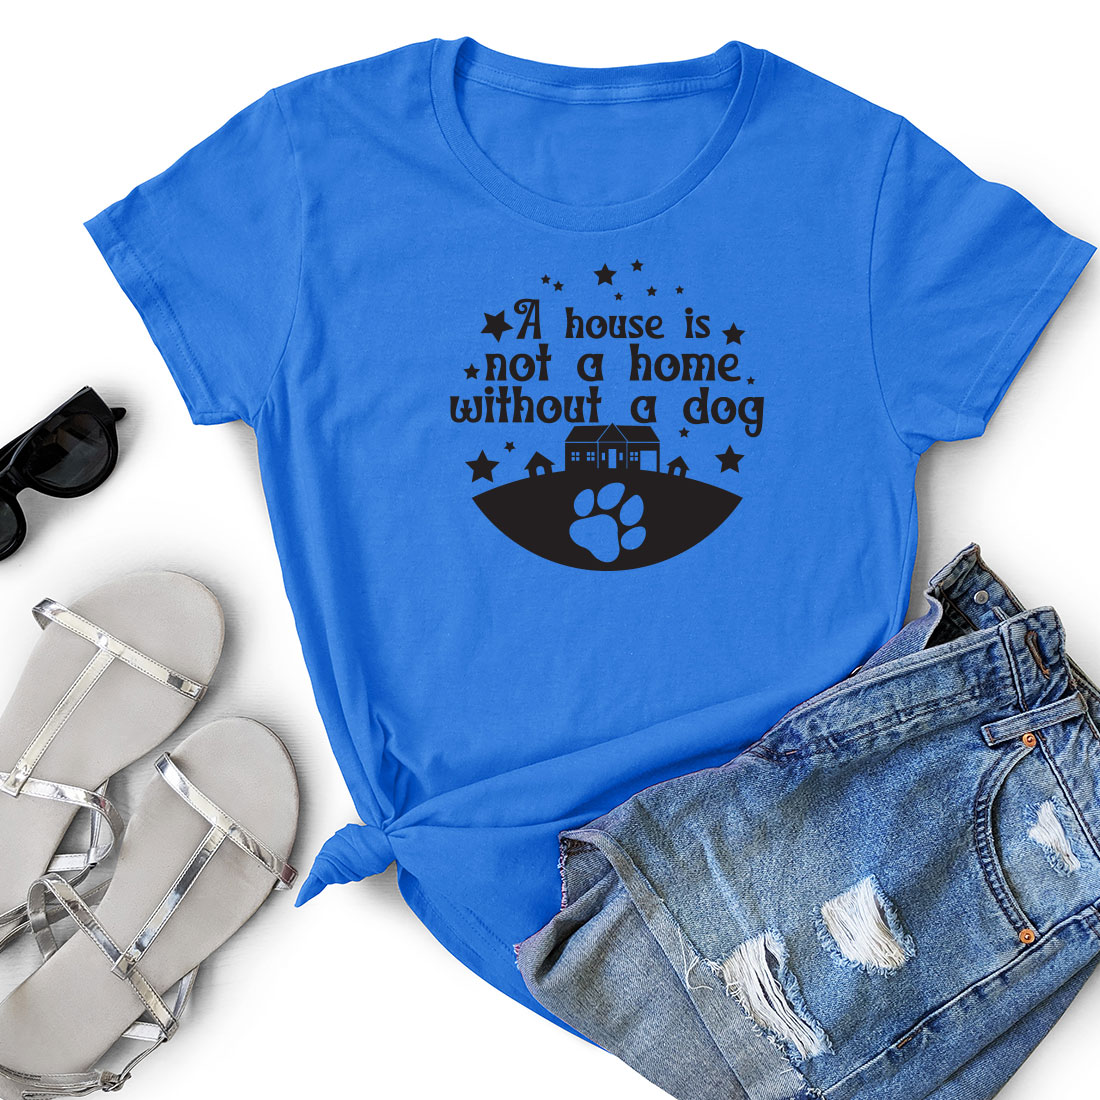 T - shirt that says a house is not a home without a dog.